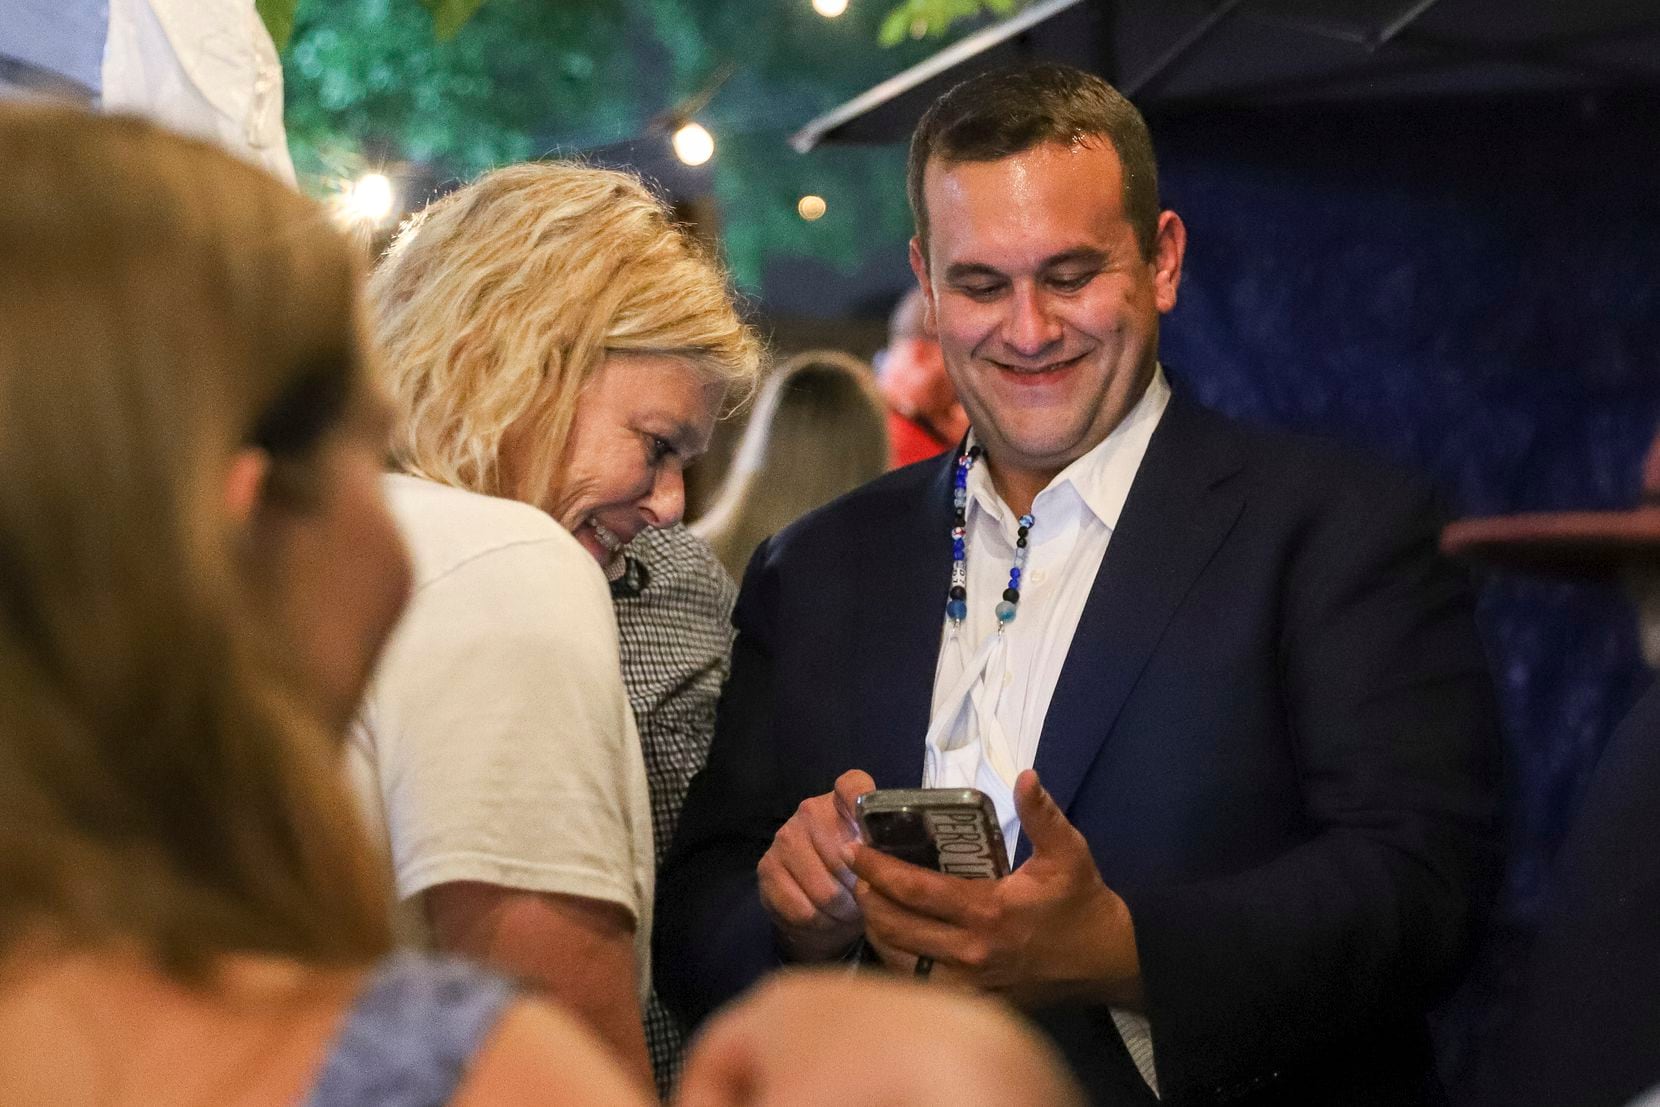 Adam Bazaldua, Dallas City Council District 7 candidate, and his mother Pam Bradford, looked at results during an election night watch party at Eight Bells Alehouse on May 1. (Elias Valverde II/Special Contributor)